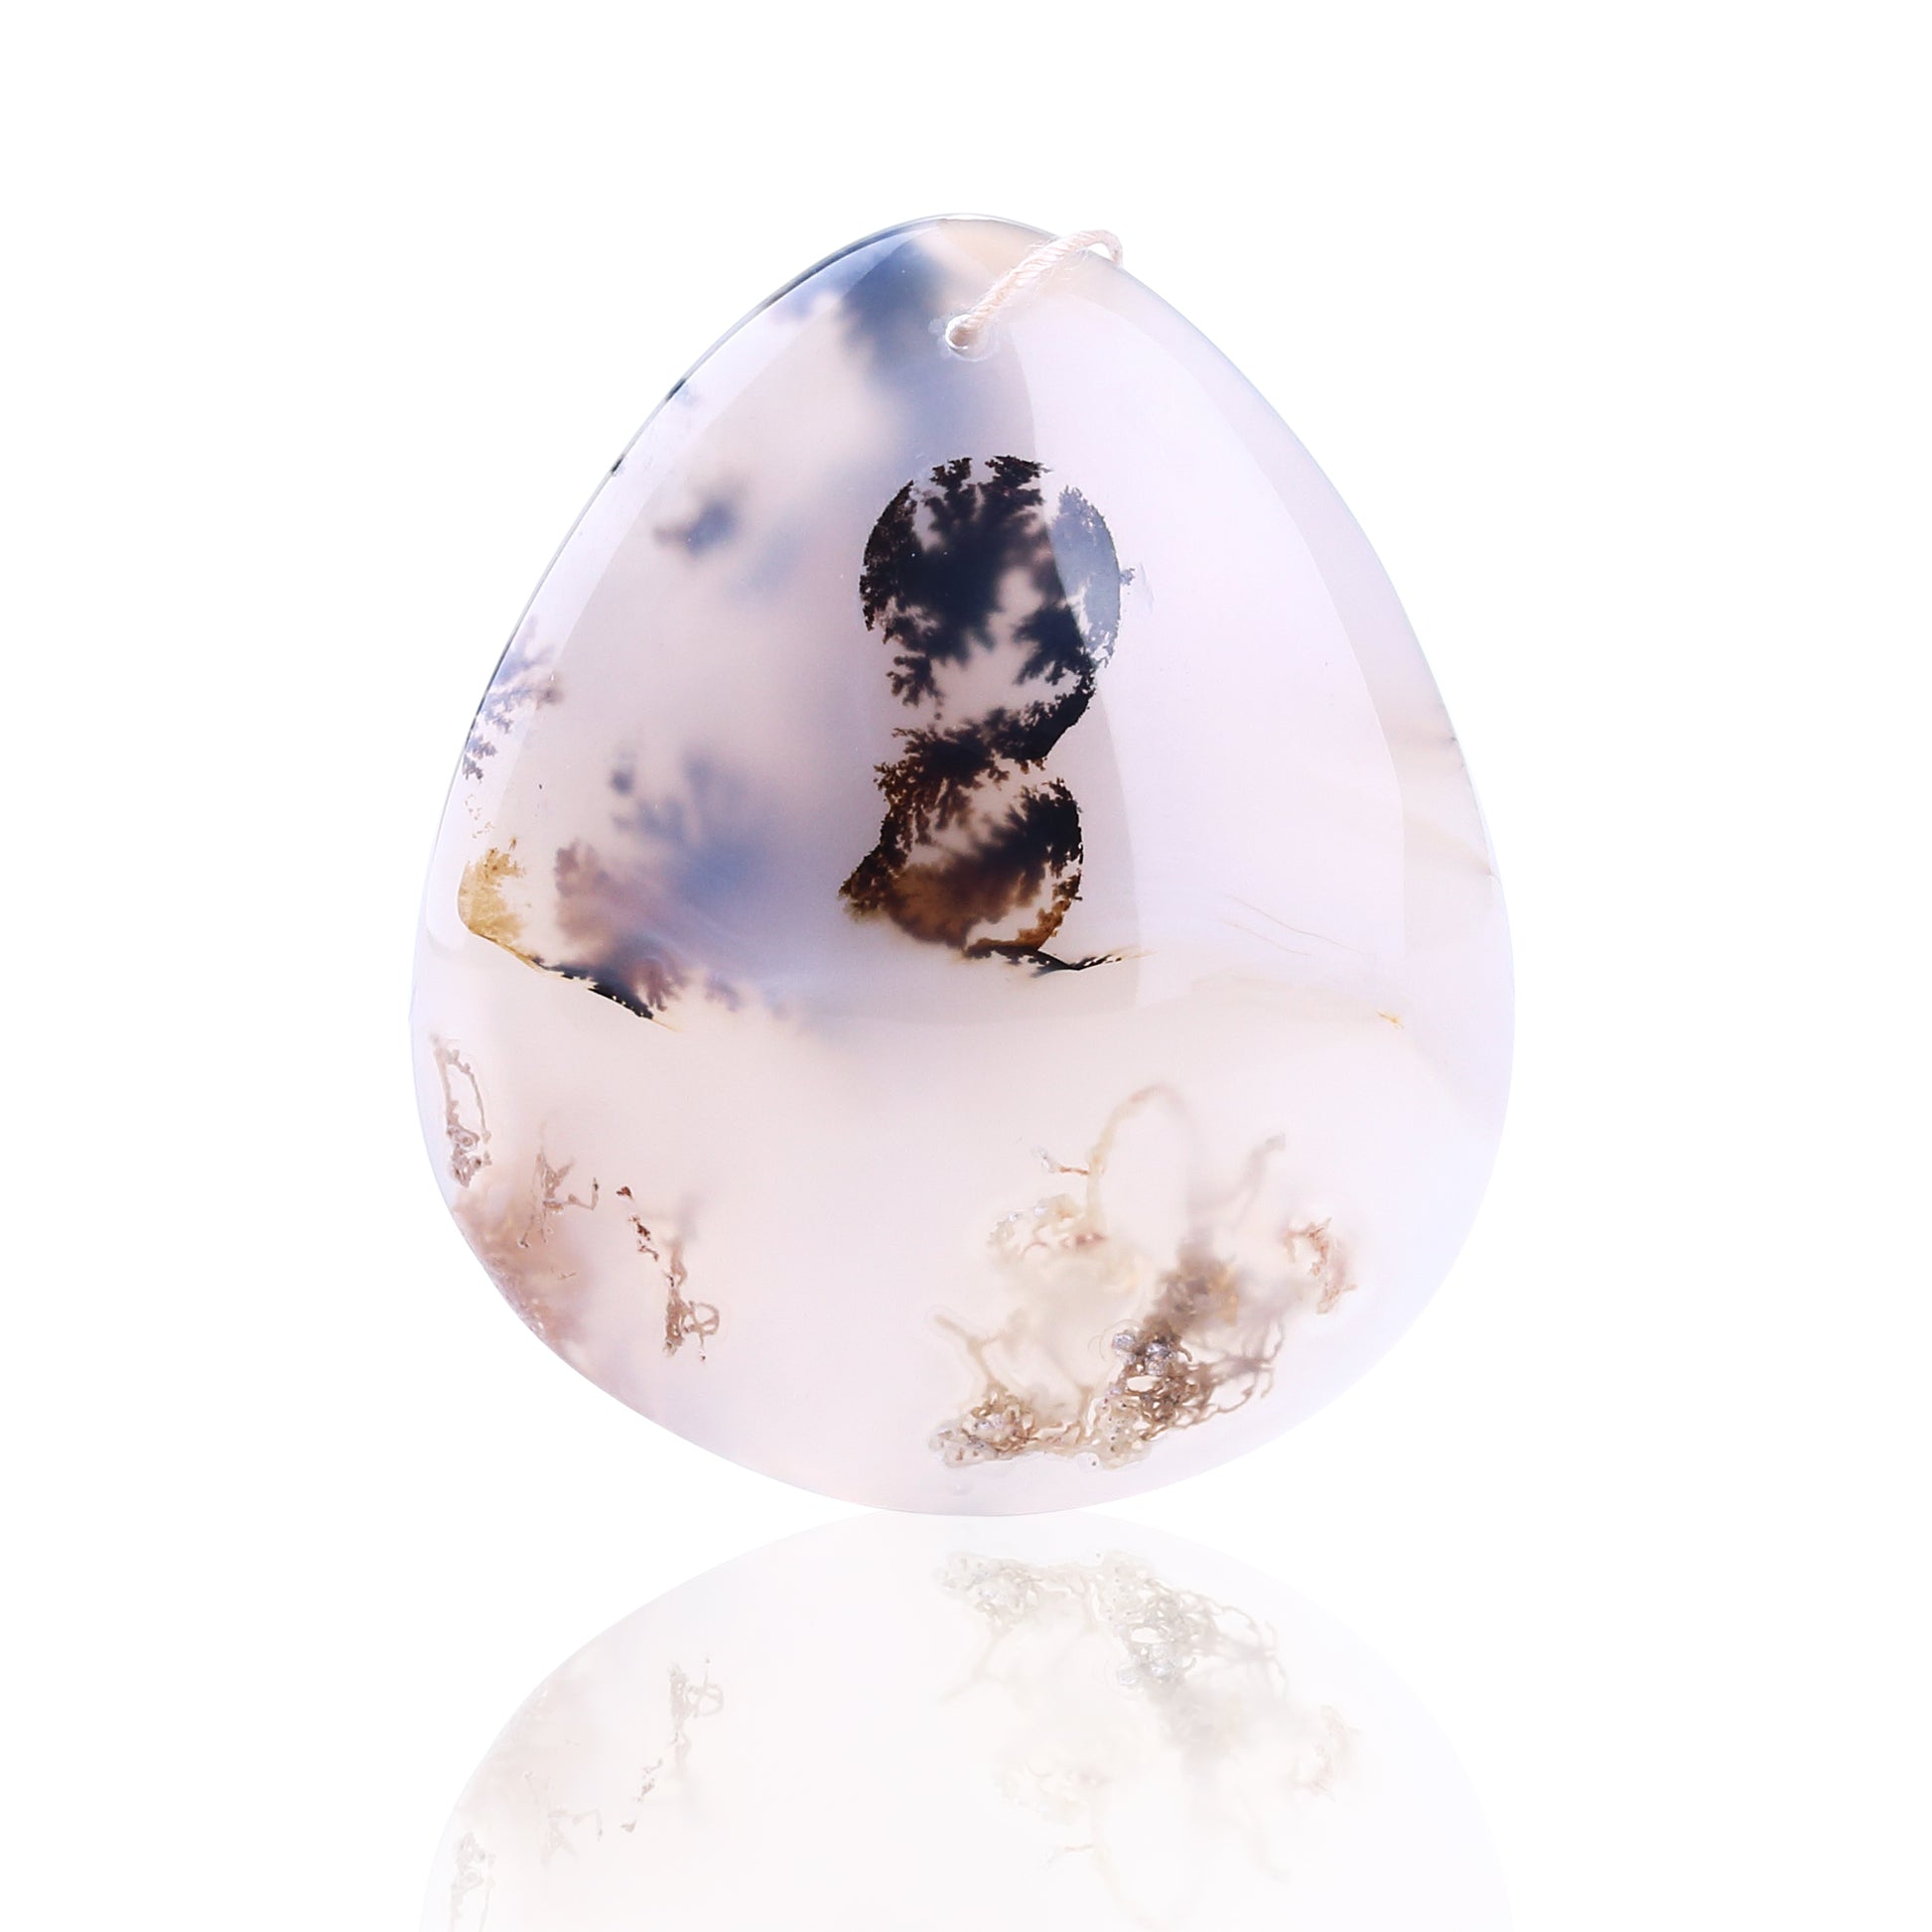 New Arrival Rare Maganese Agate Gemstone Pendant Bead 53x44x13mm 46.2g - MyGemGarden